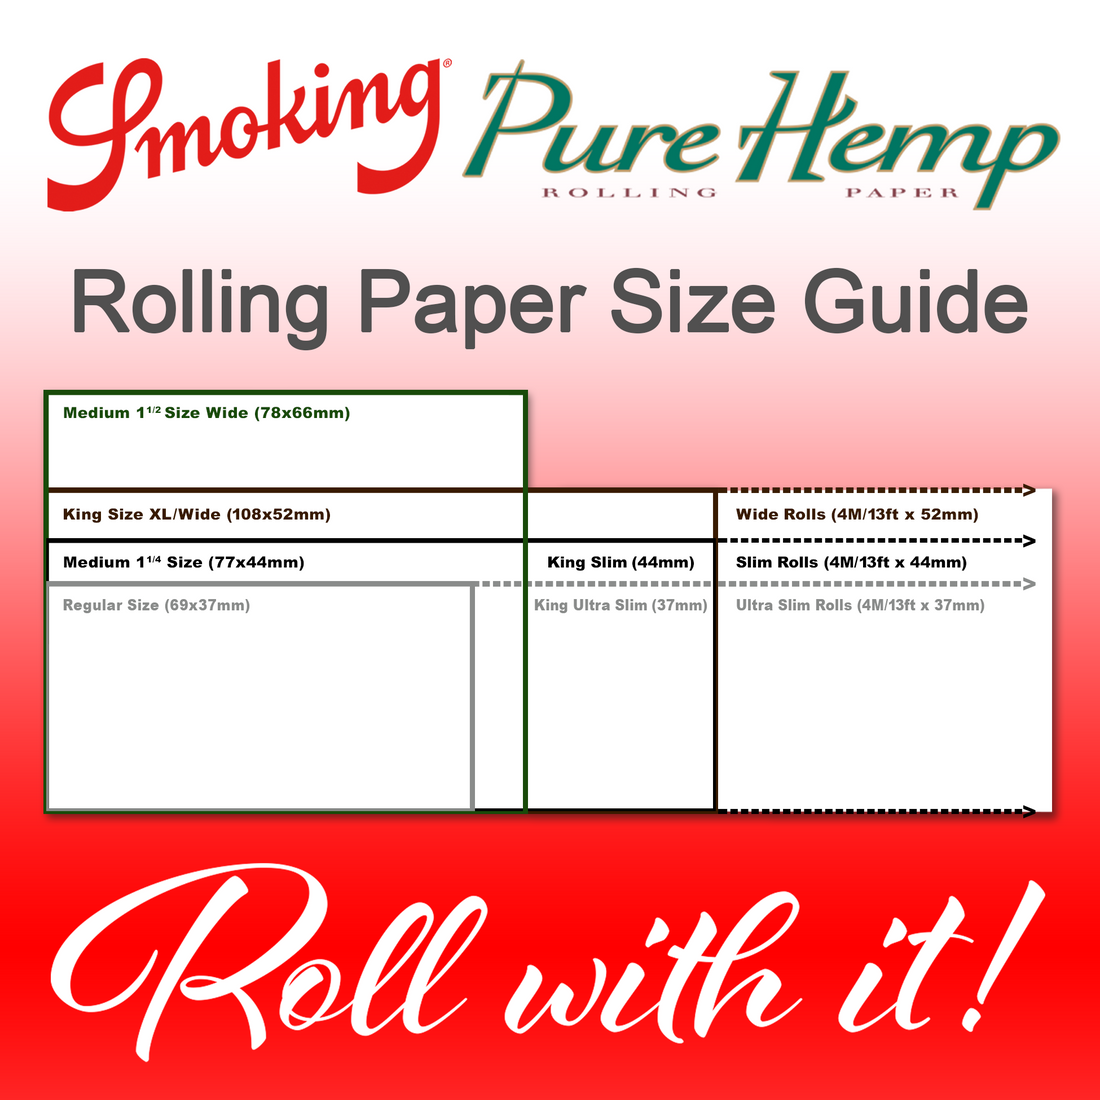 Rolling Paper Size Guide